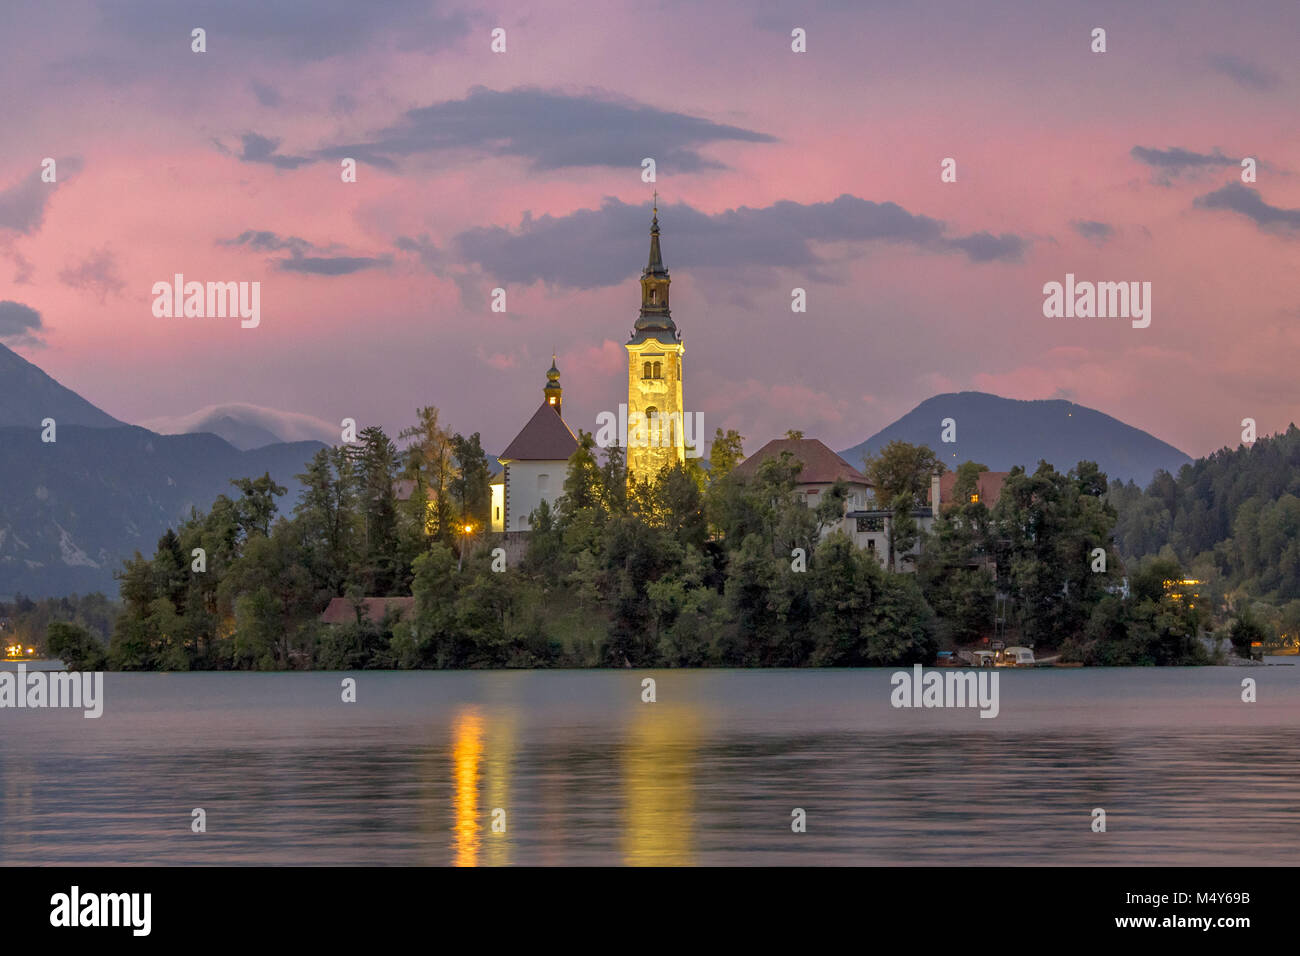 Landscape scene Lake Bled with St Mary's church on island and mountains in backdrop under pink stormy sky, Slovenia, Europe Stock Photo